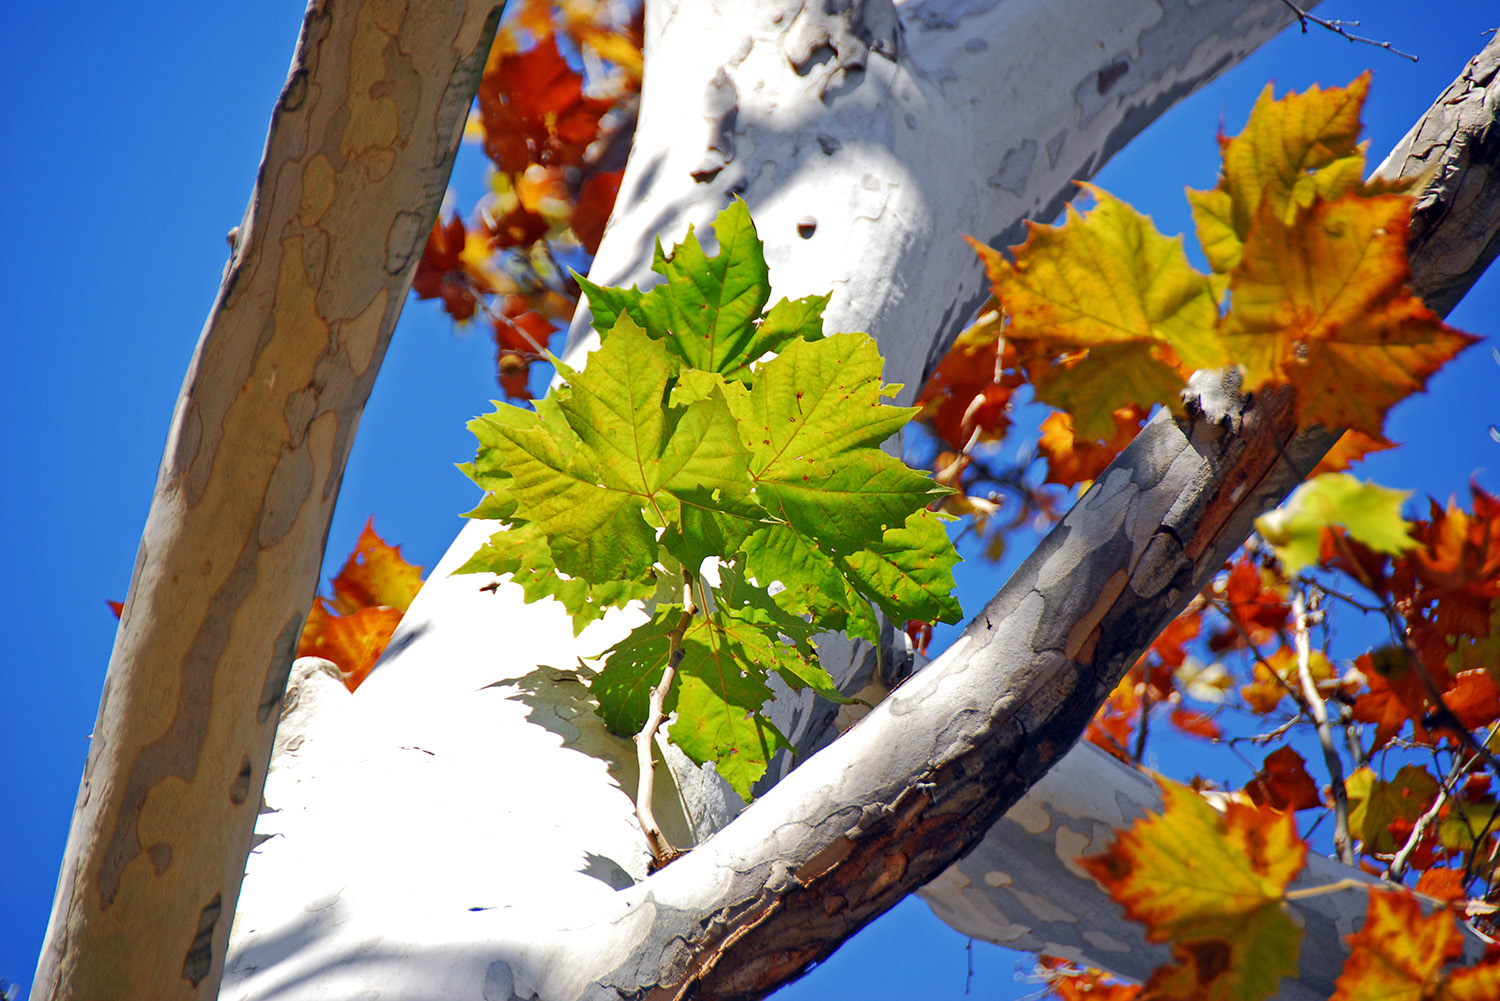 Sycamore_Tree_Autumn_Fall_Leaves_Trunk_Branches_Closeup.jpg